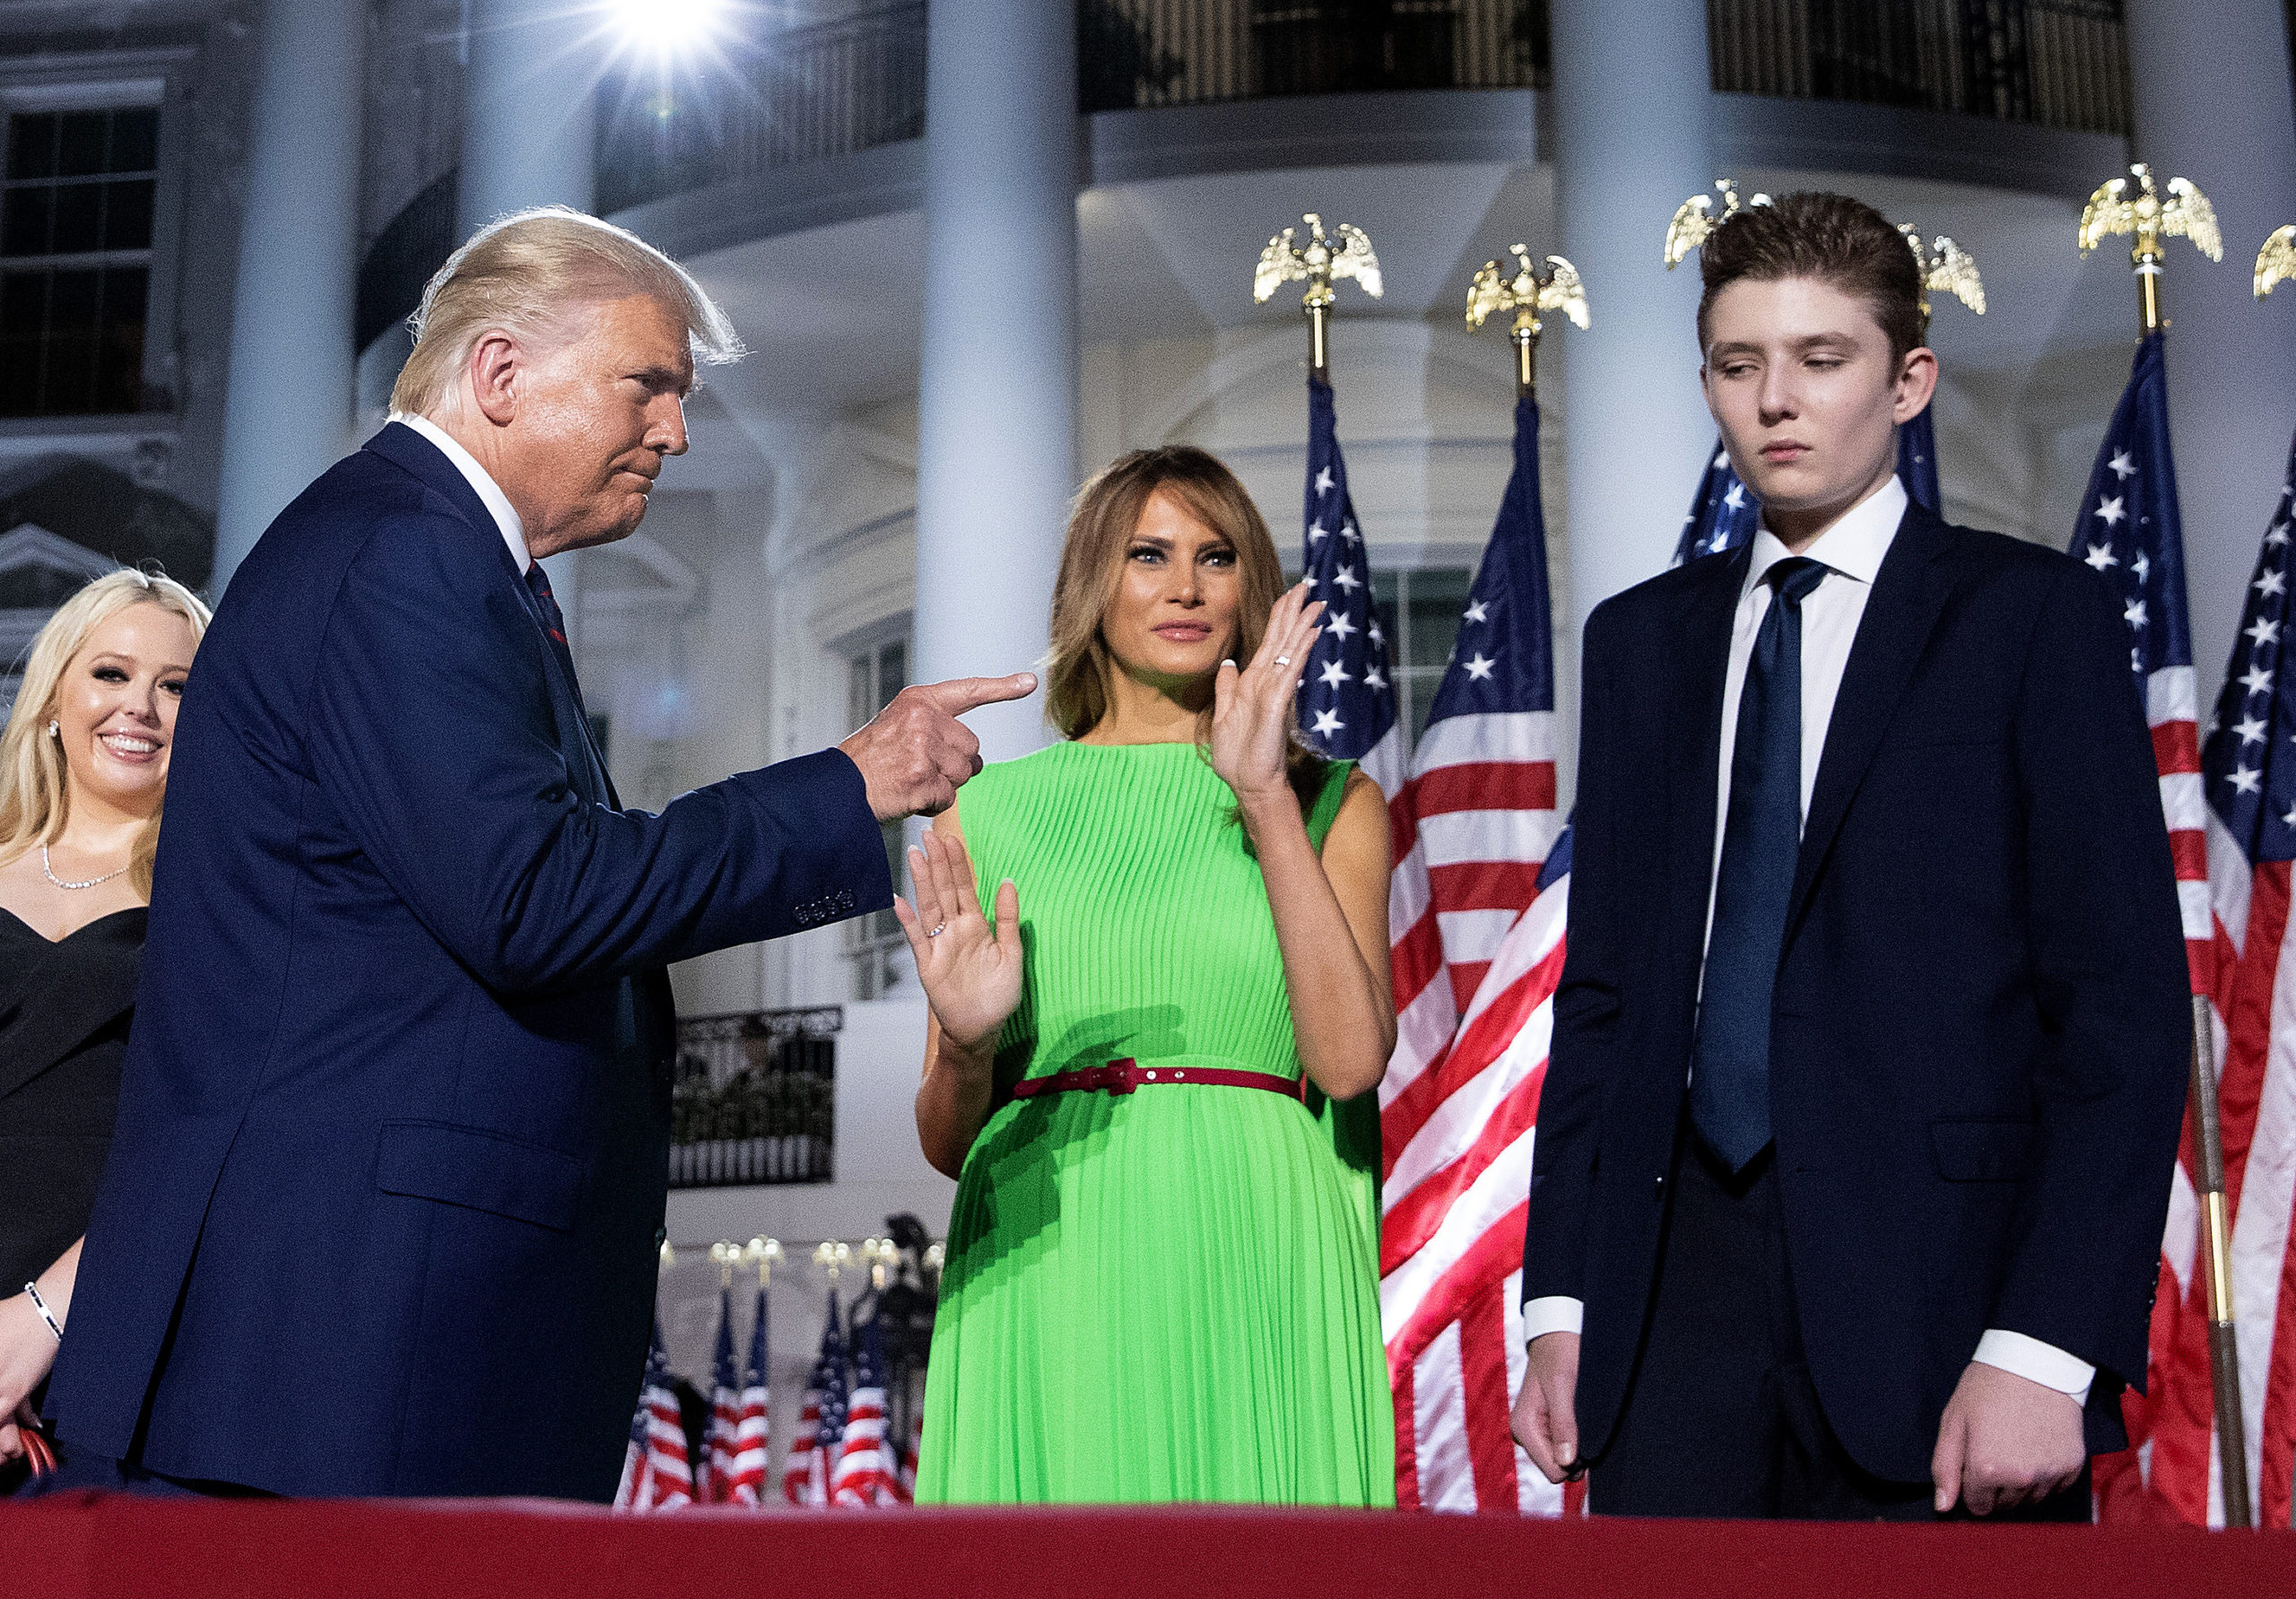 WASHINGTON, DC - AUGUST 27: U.S. President Donald Trump (L) gestures toward first lady Melania Trump and his son Barron Trump after delivering his acceptance speech for the Republican presidential nomination on the South Lawn of the White House August 27, 2020 in Washington, DC. Trump gave the speech in front of 1500 invited guests. (Photo by Chip Somodevilla/Getty Images)